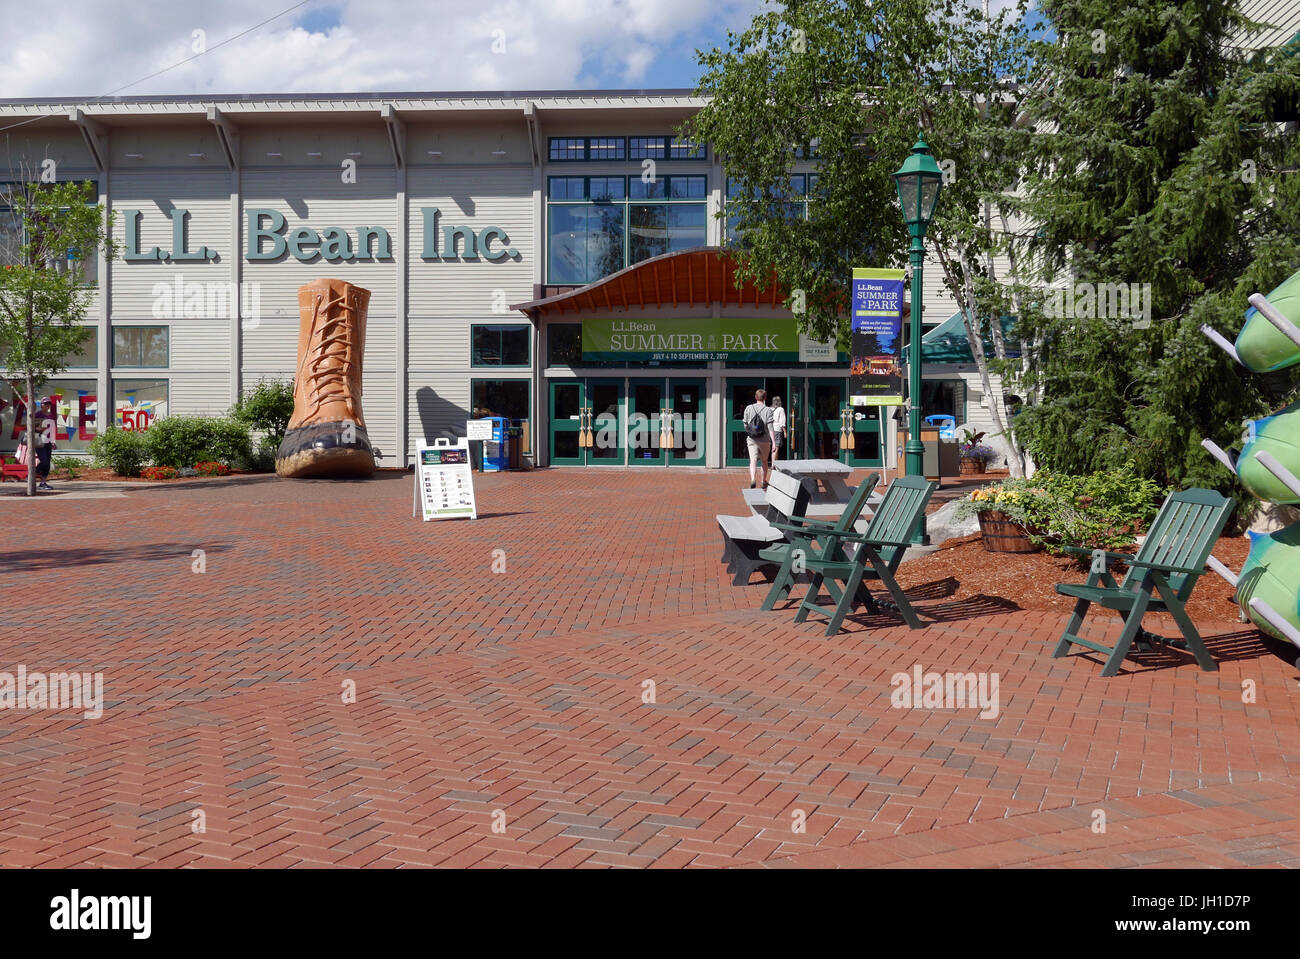 The L.L. Bean store in Freeport Maine Stock Photo